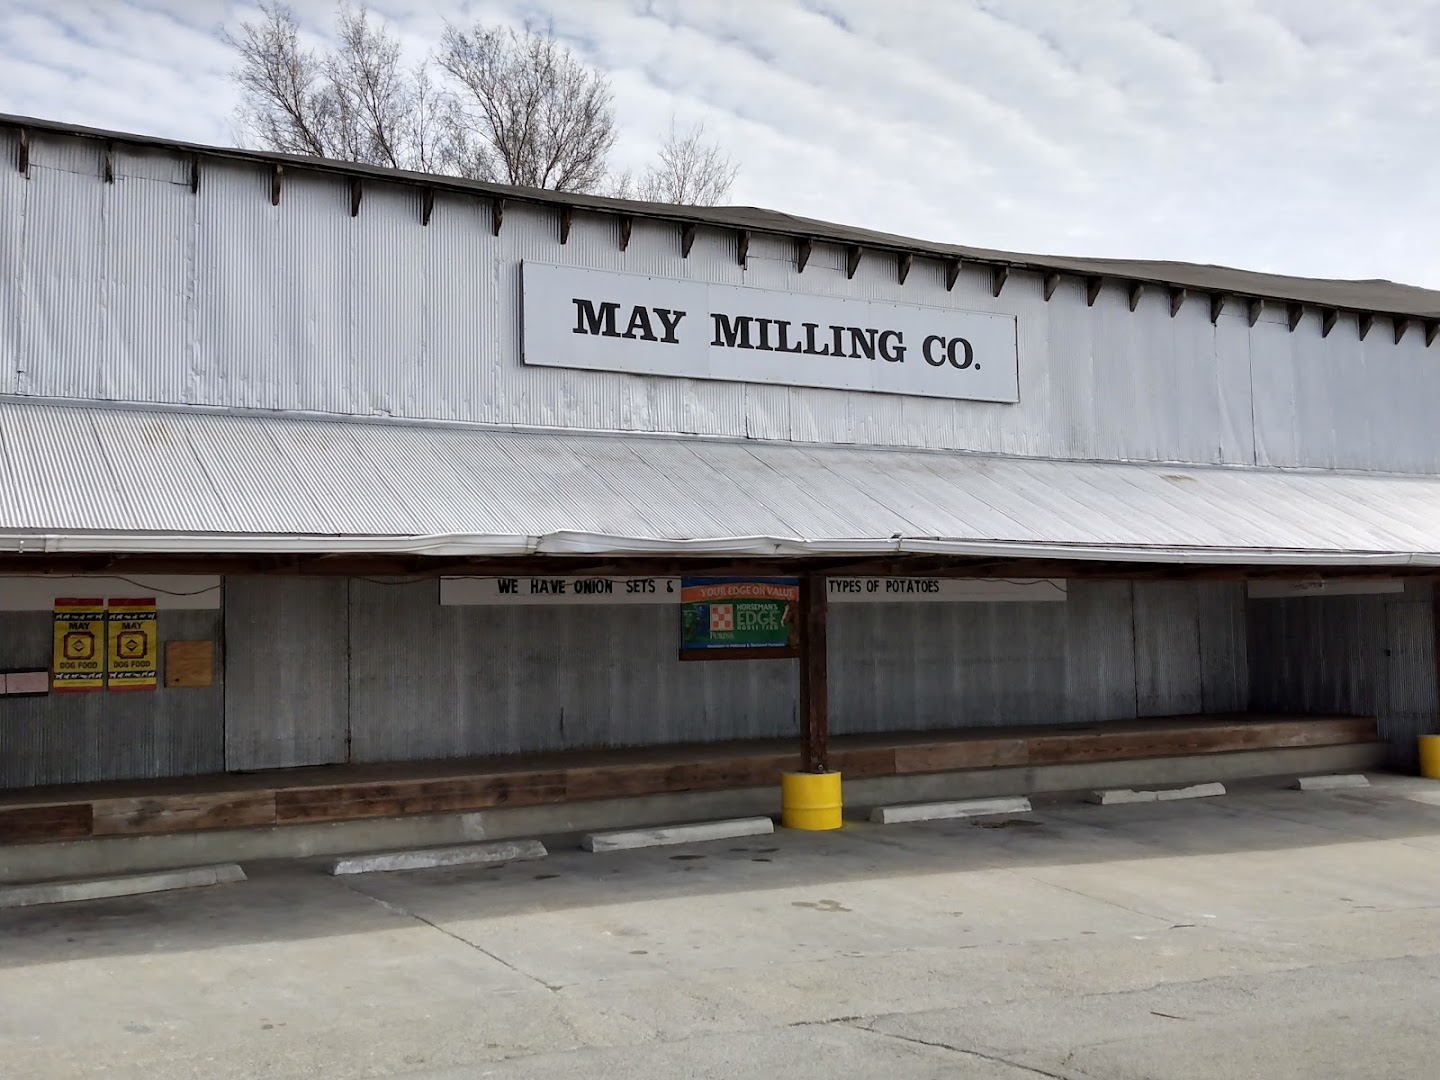 May Milling Co